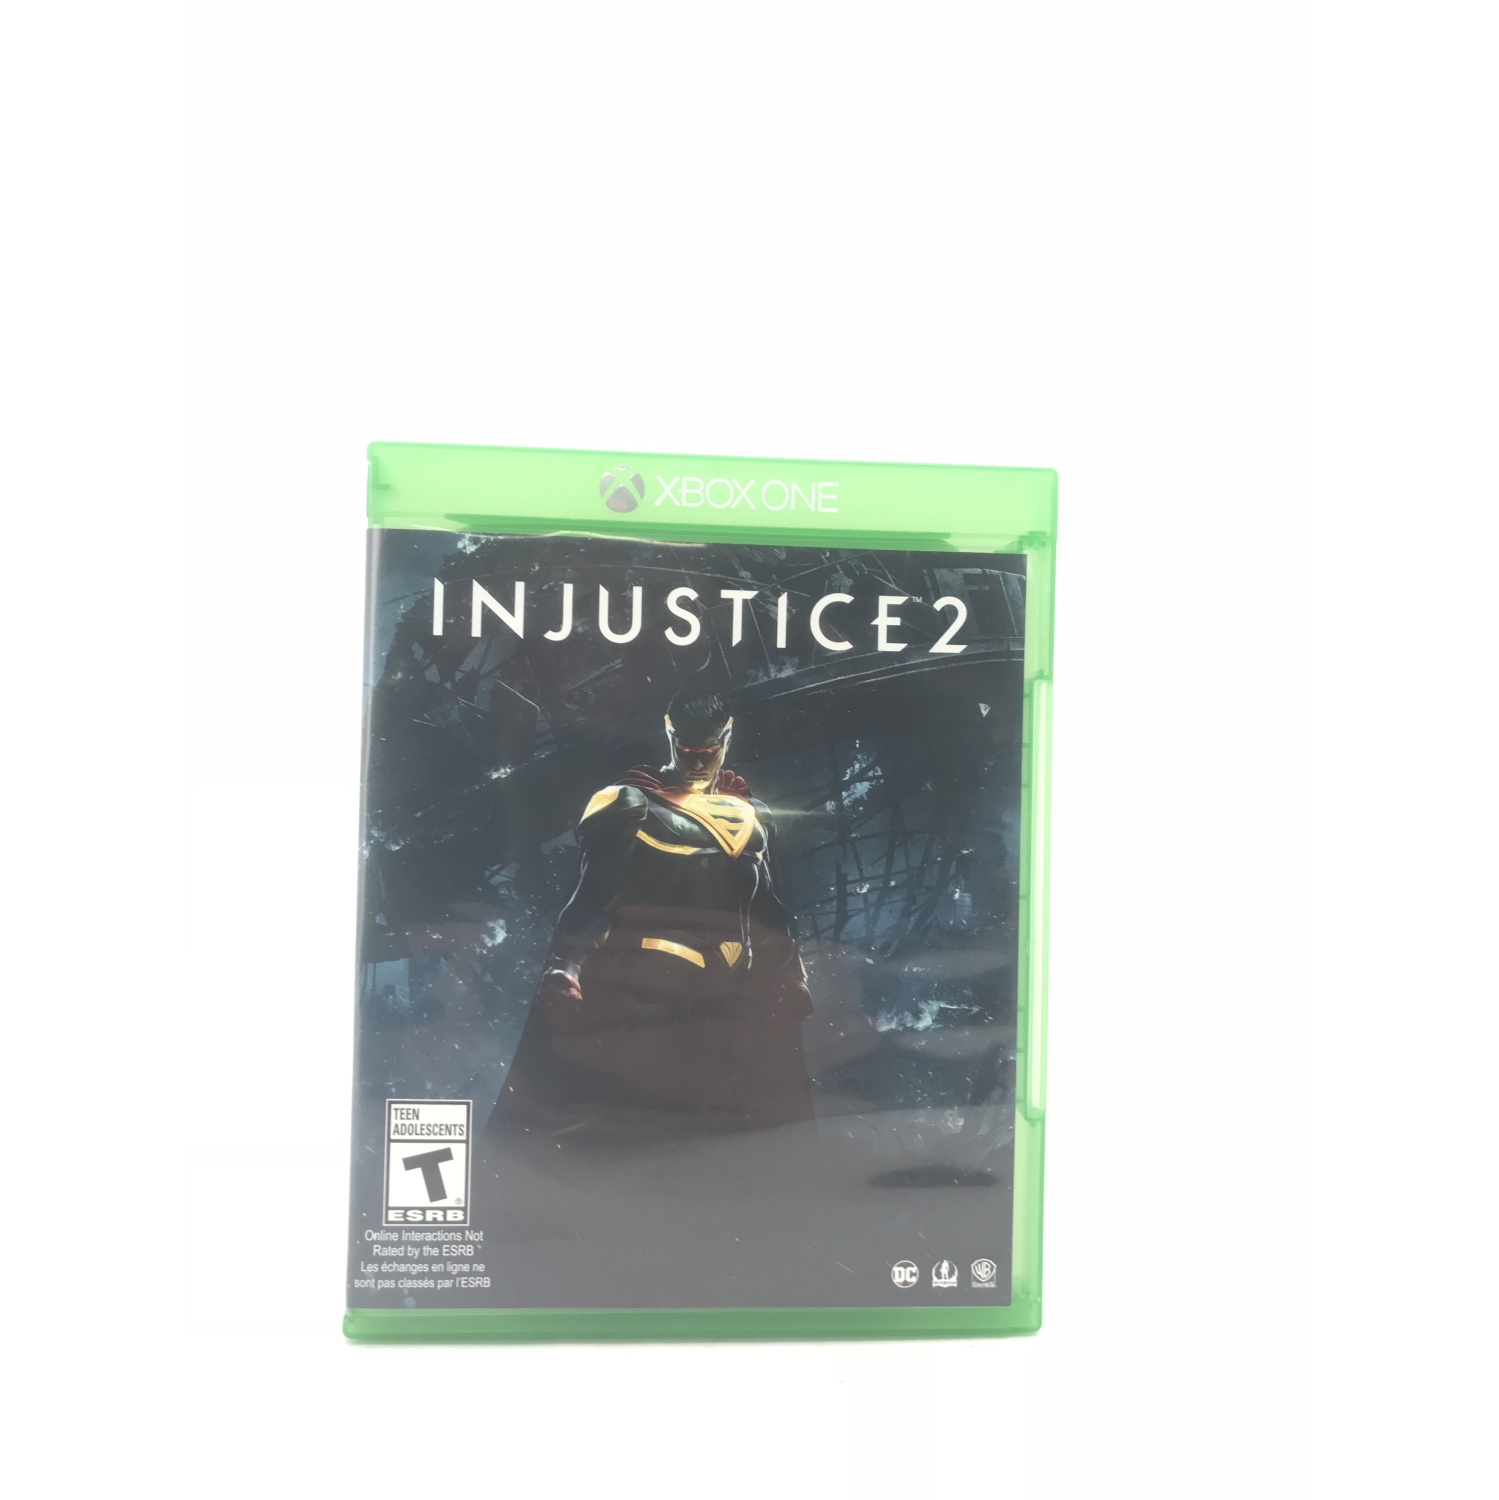 Injustice 2 I Xbox One Video Game I Previously Played